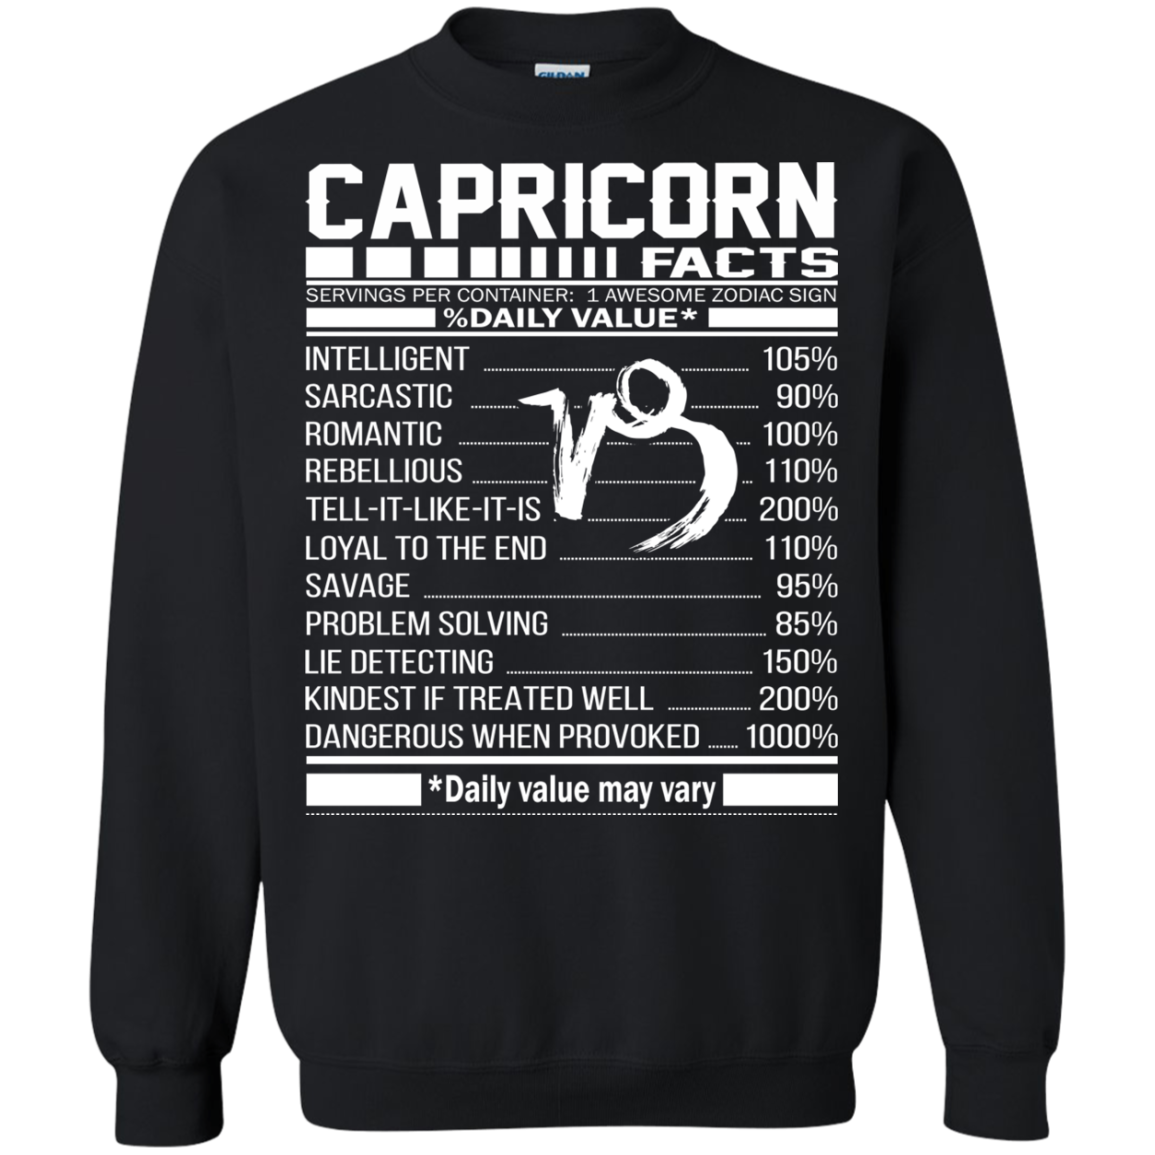 Capricorn Facts - Awesome Zodiac Sign - %Daily Value Shirt, Hoodie ...